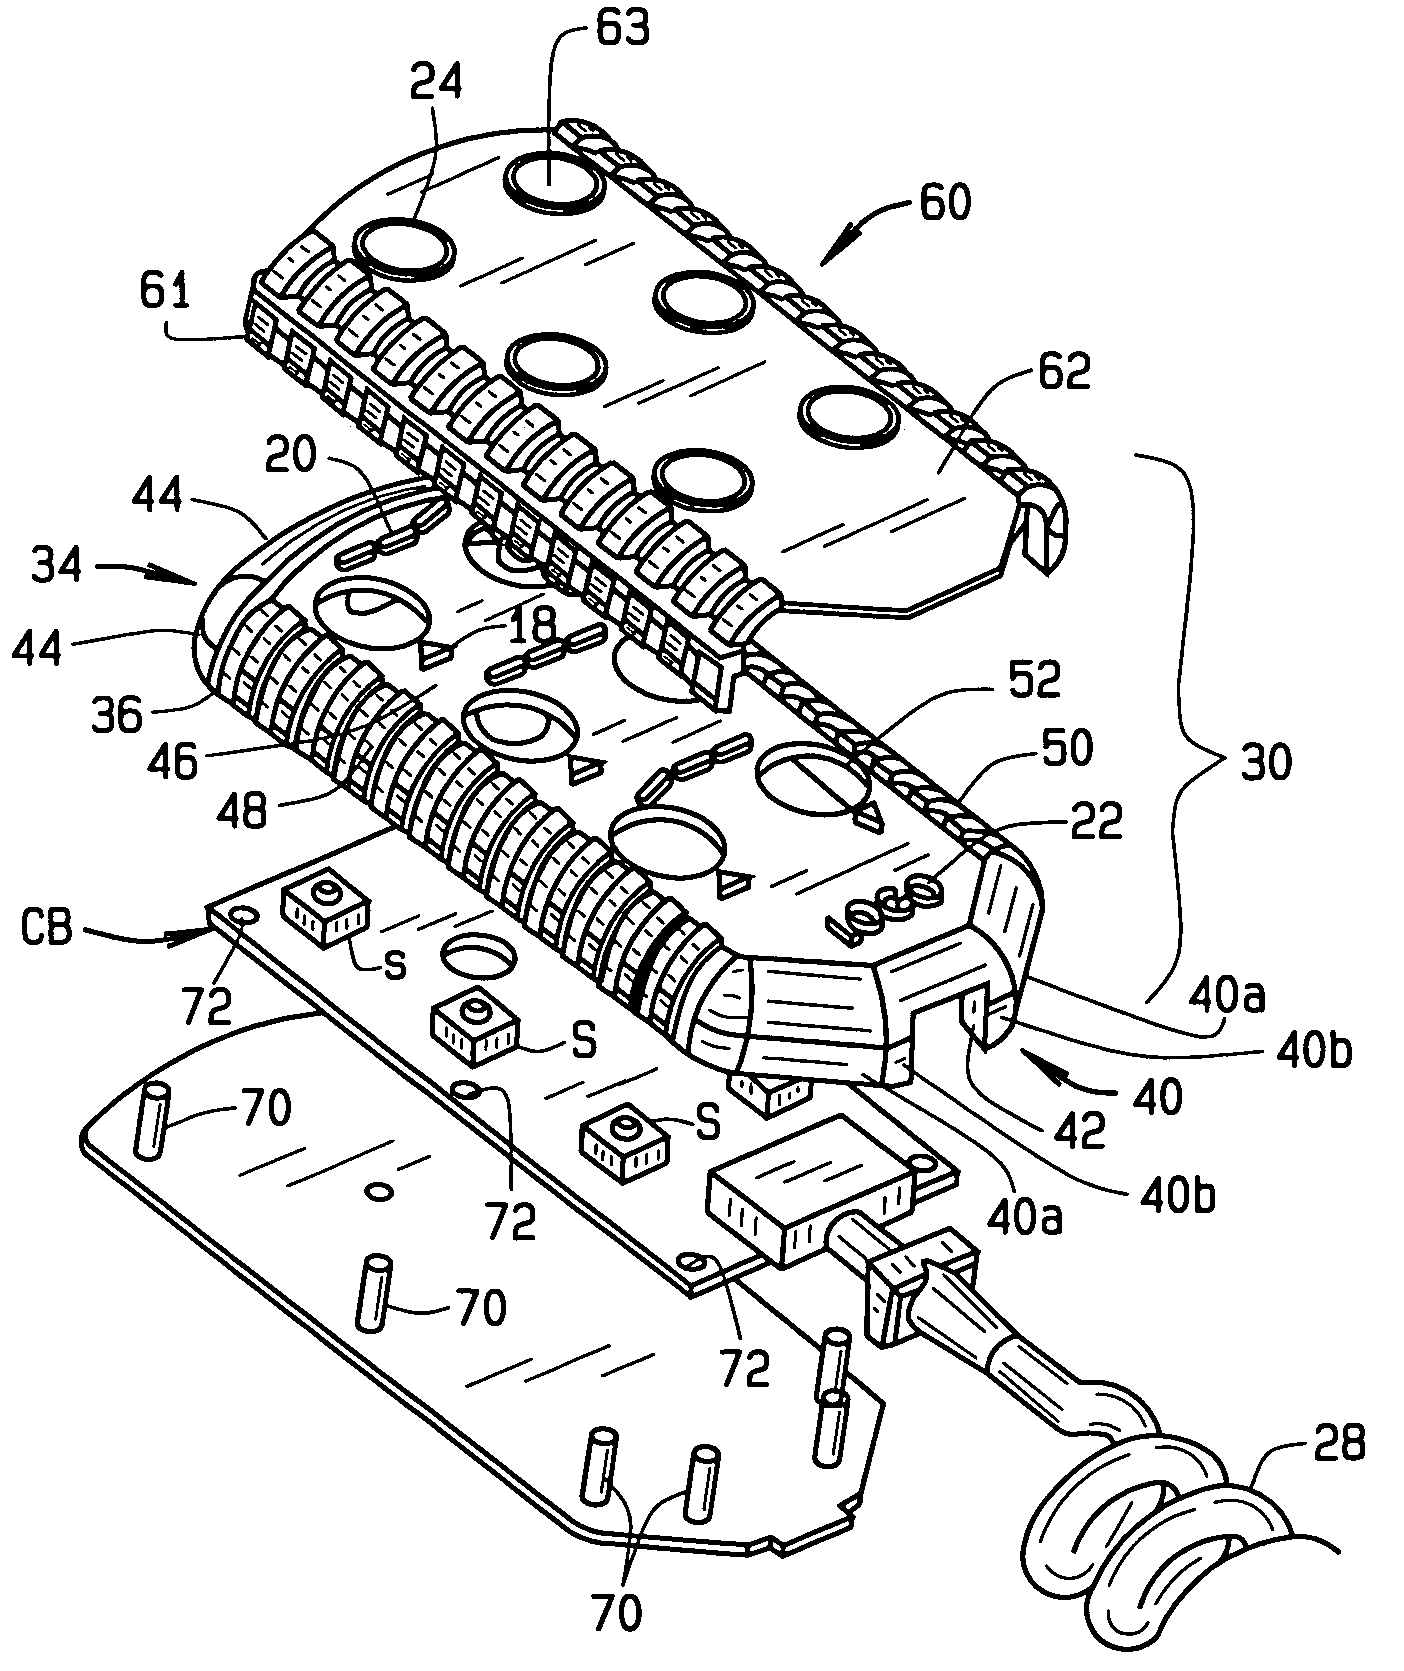 Control housing and method of manufacturing same